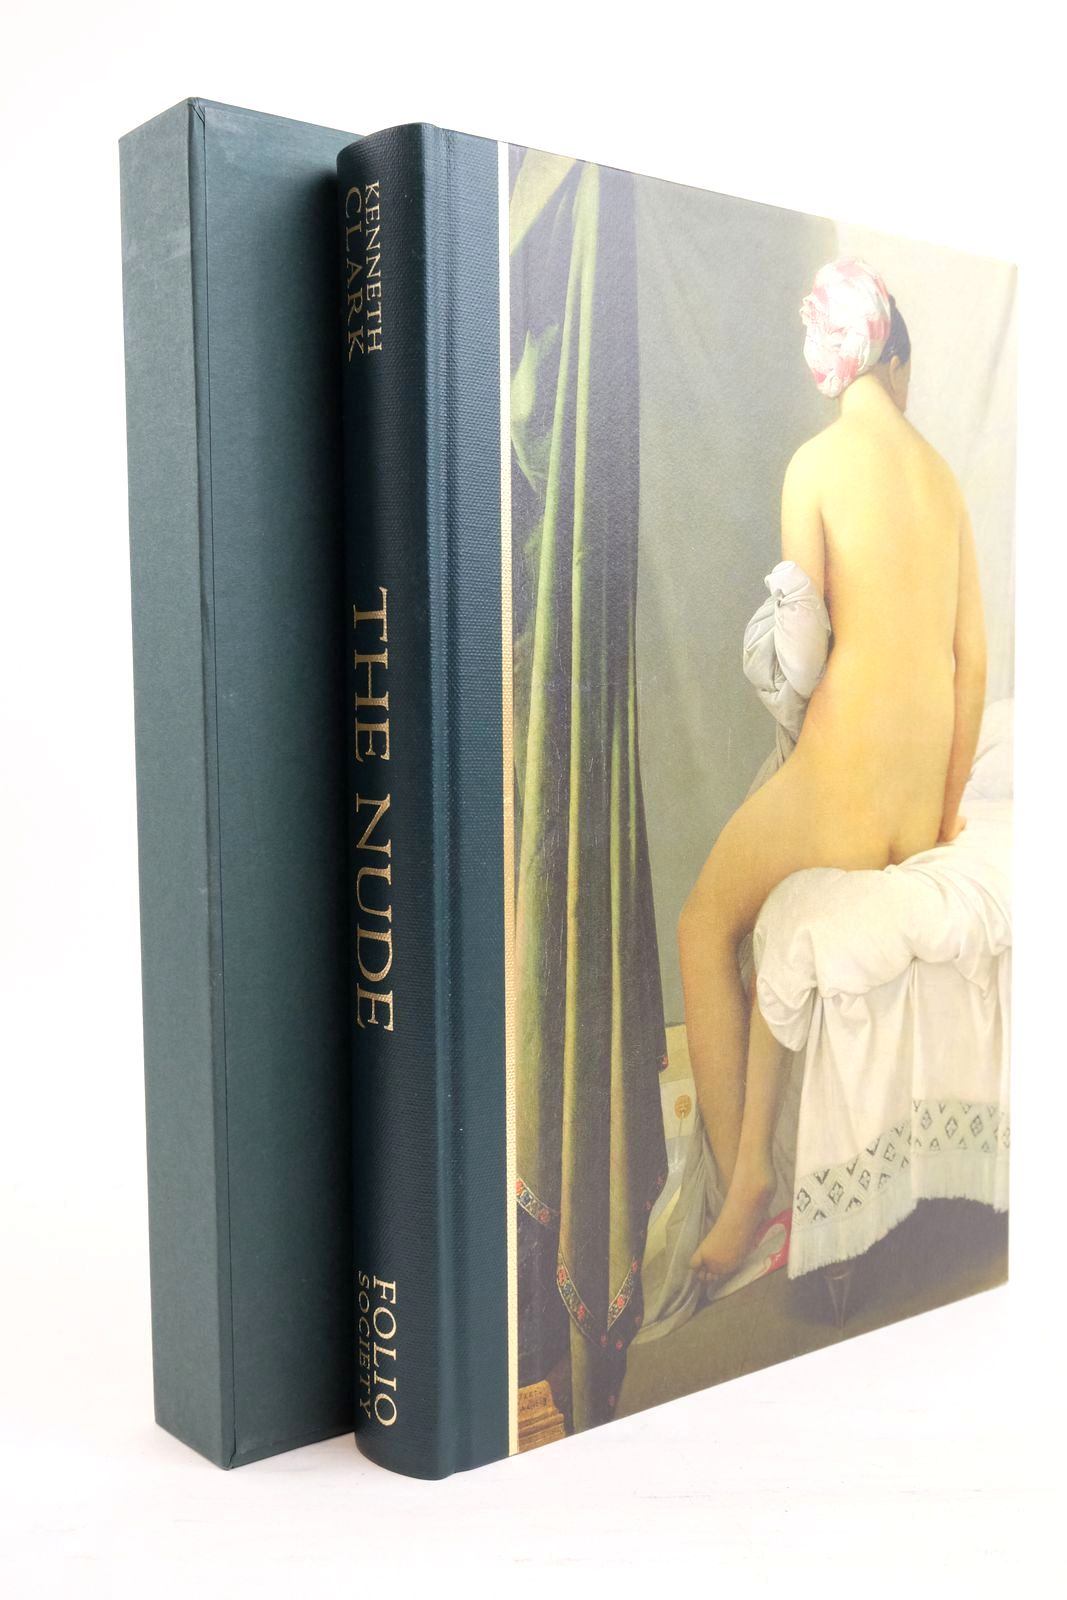 Photo of THE NUDE: A STUDY IN IDEAL FORM written by Clark, Kenneth
Smith, Charles Saumarez published by Folio Society (STOCK CODE: 1320837)  for sale by Stella & Rose's Books